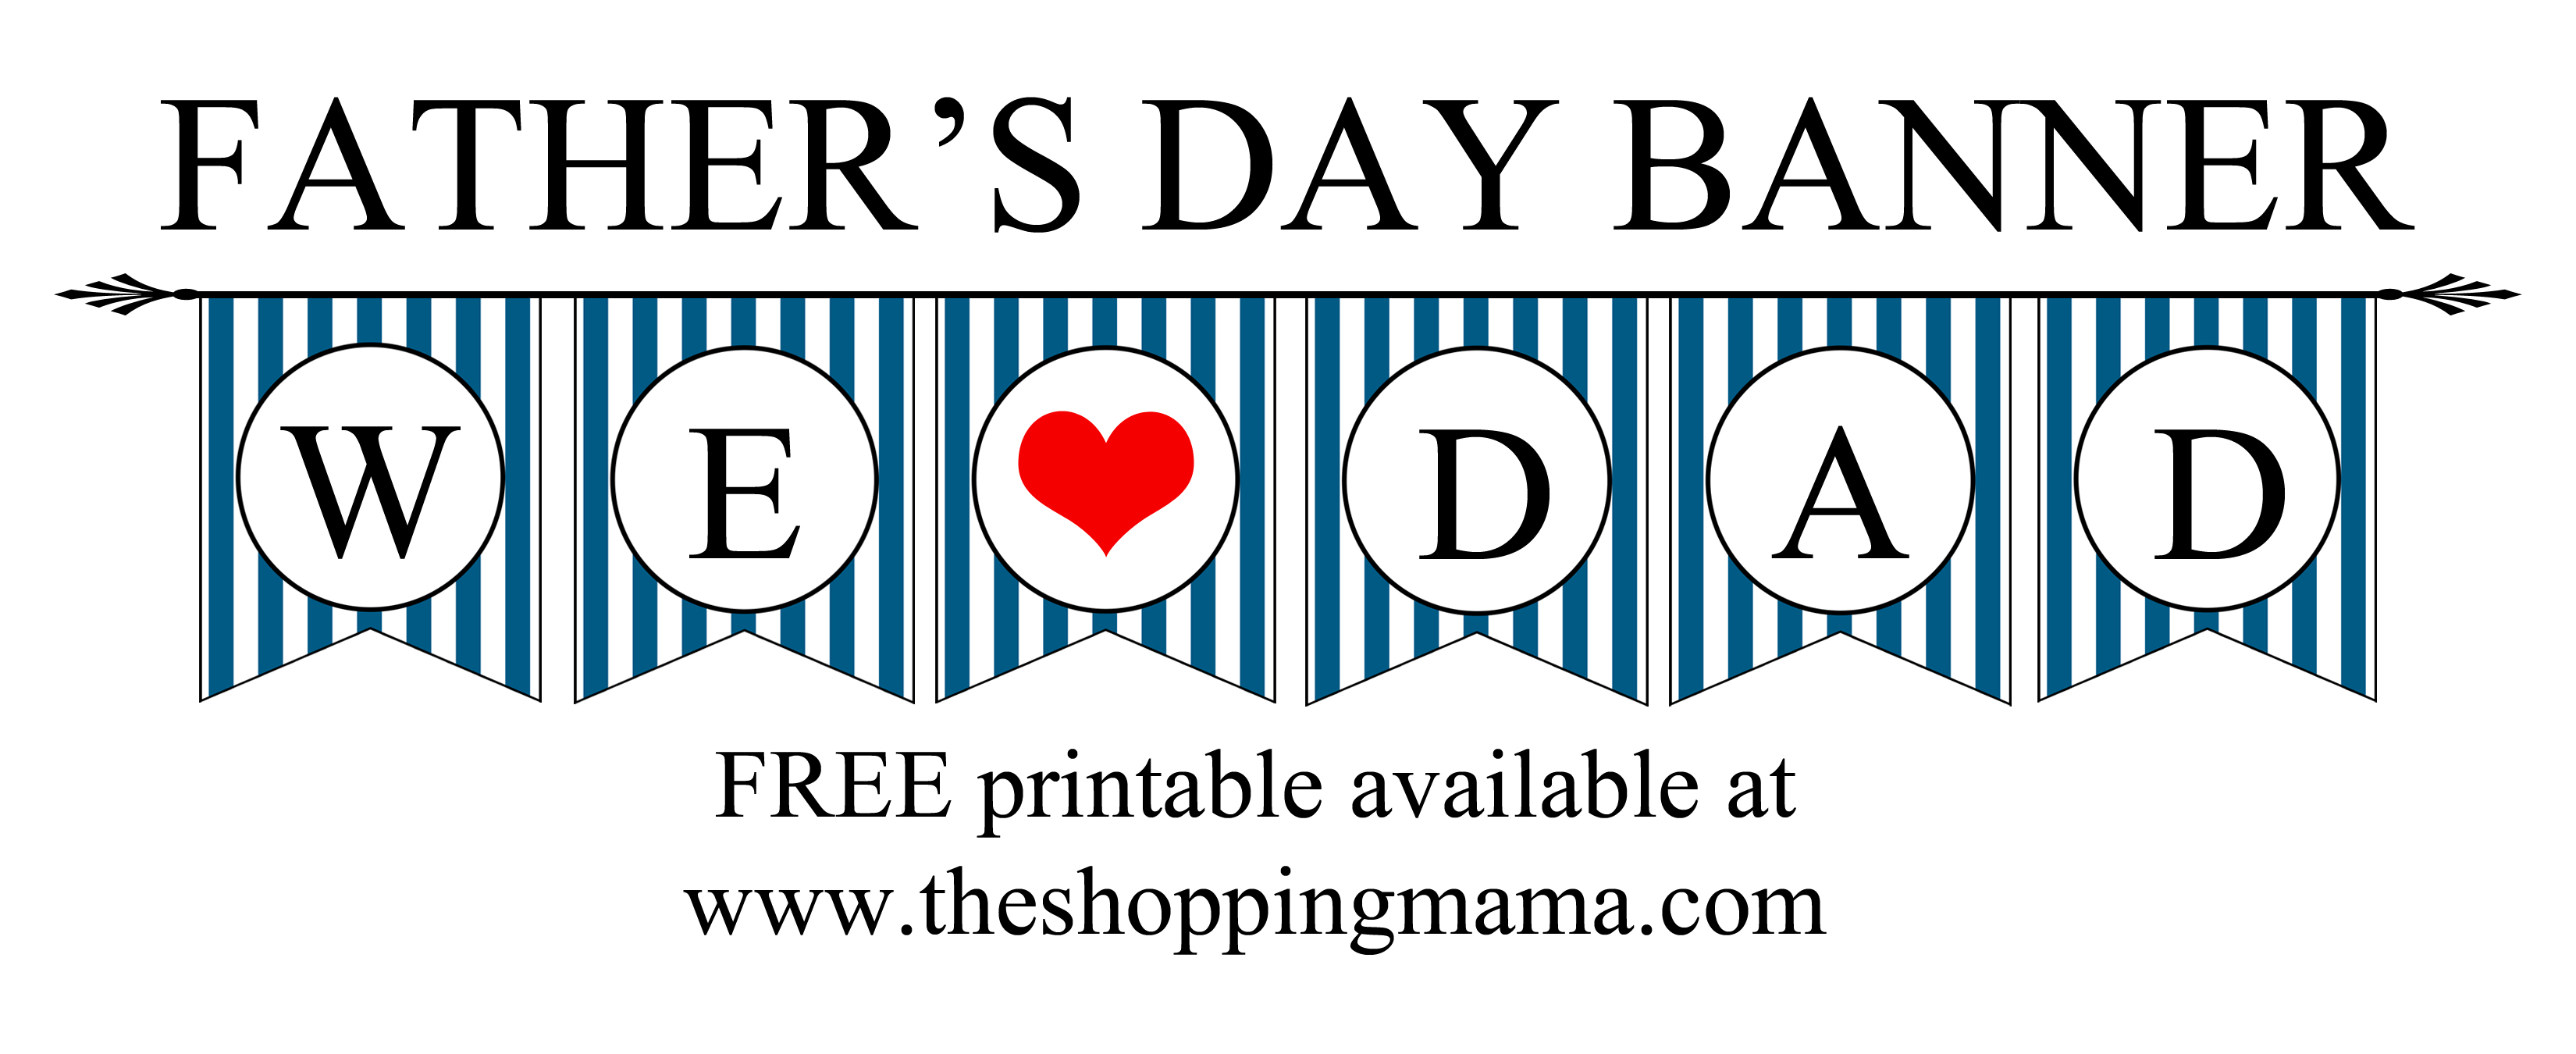 4-best-images-of-father-s-day-printable-banner-happy-father-s-day